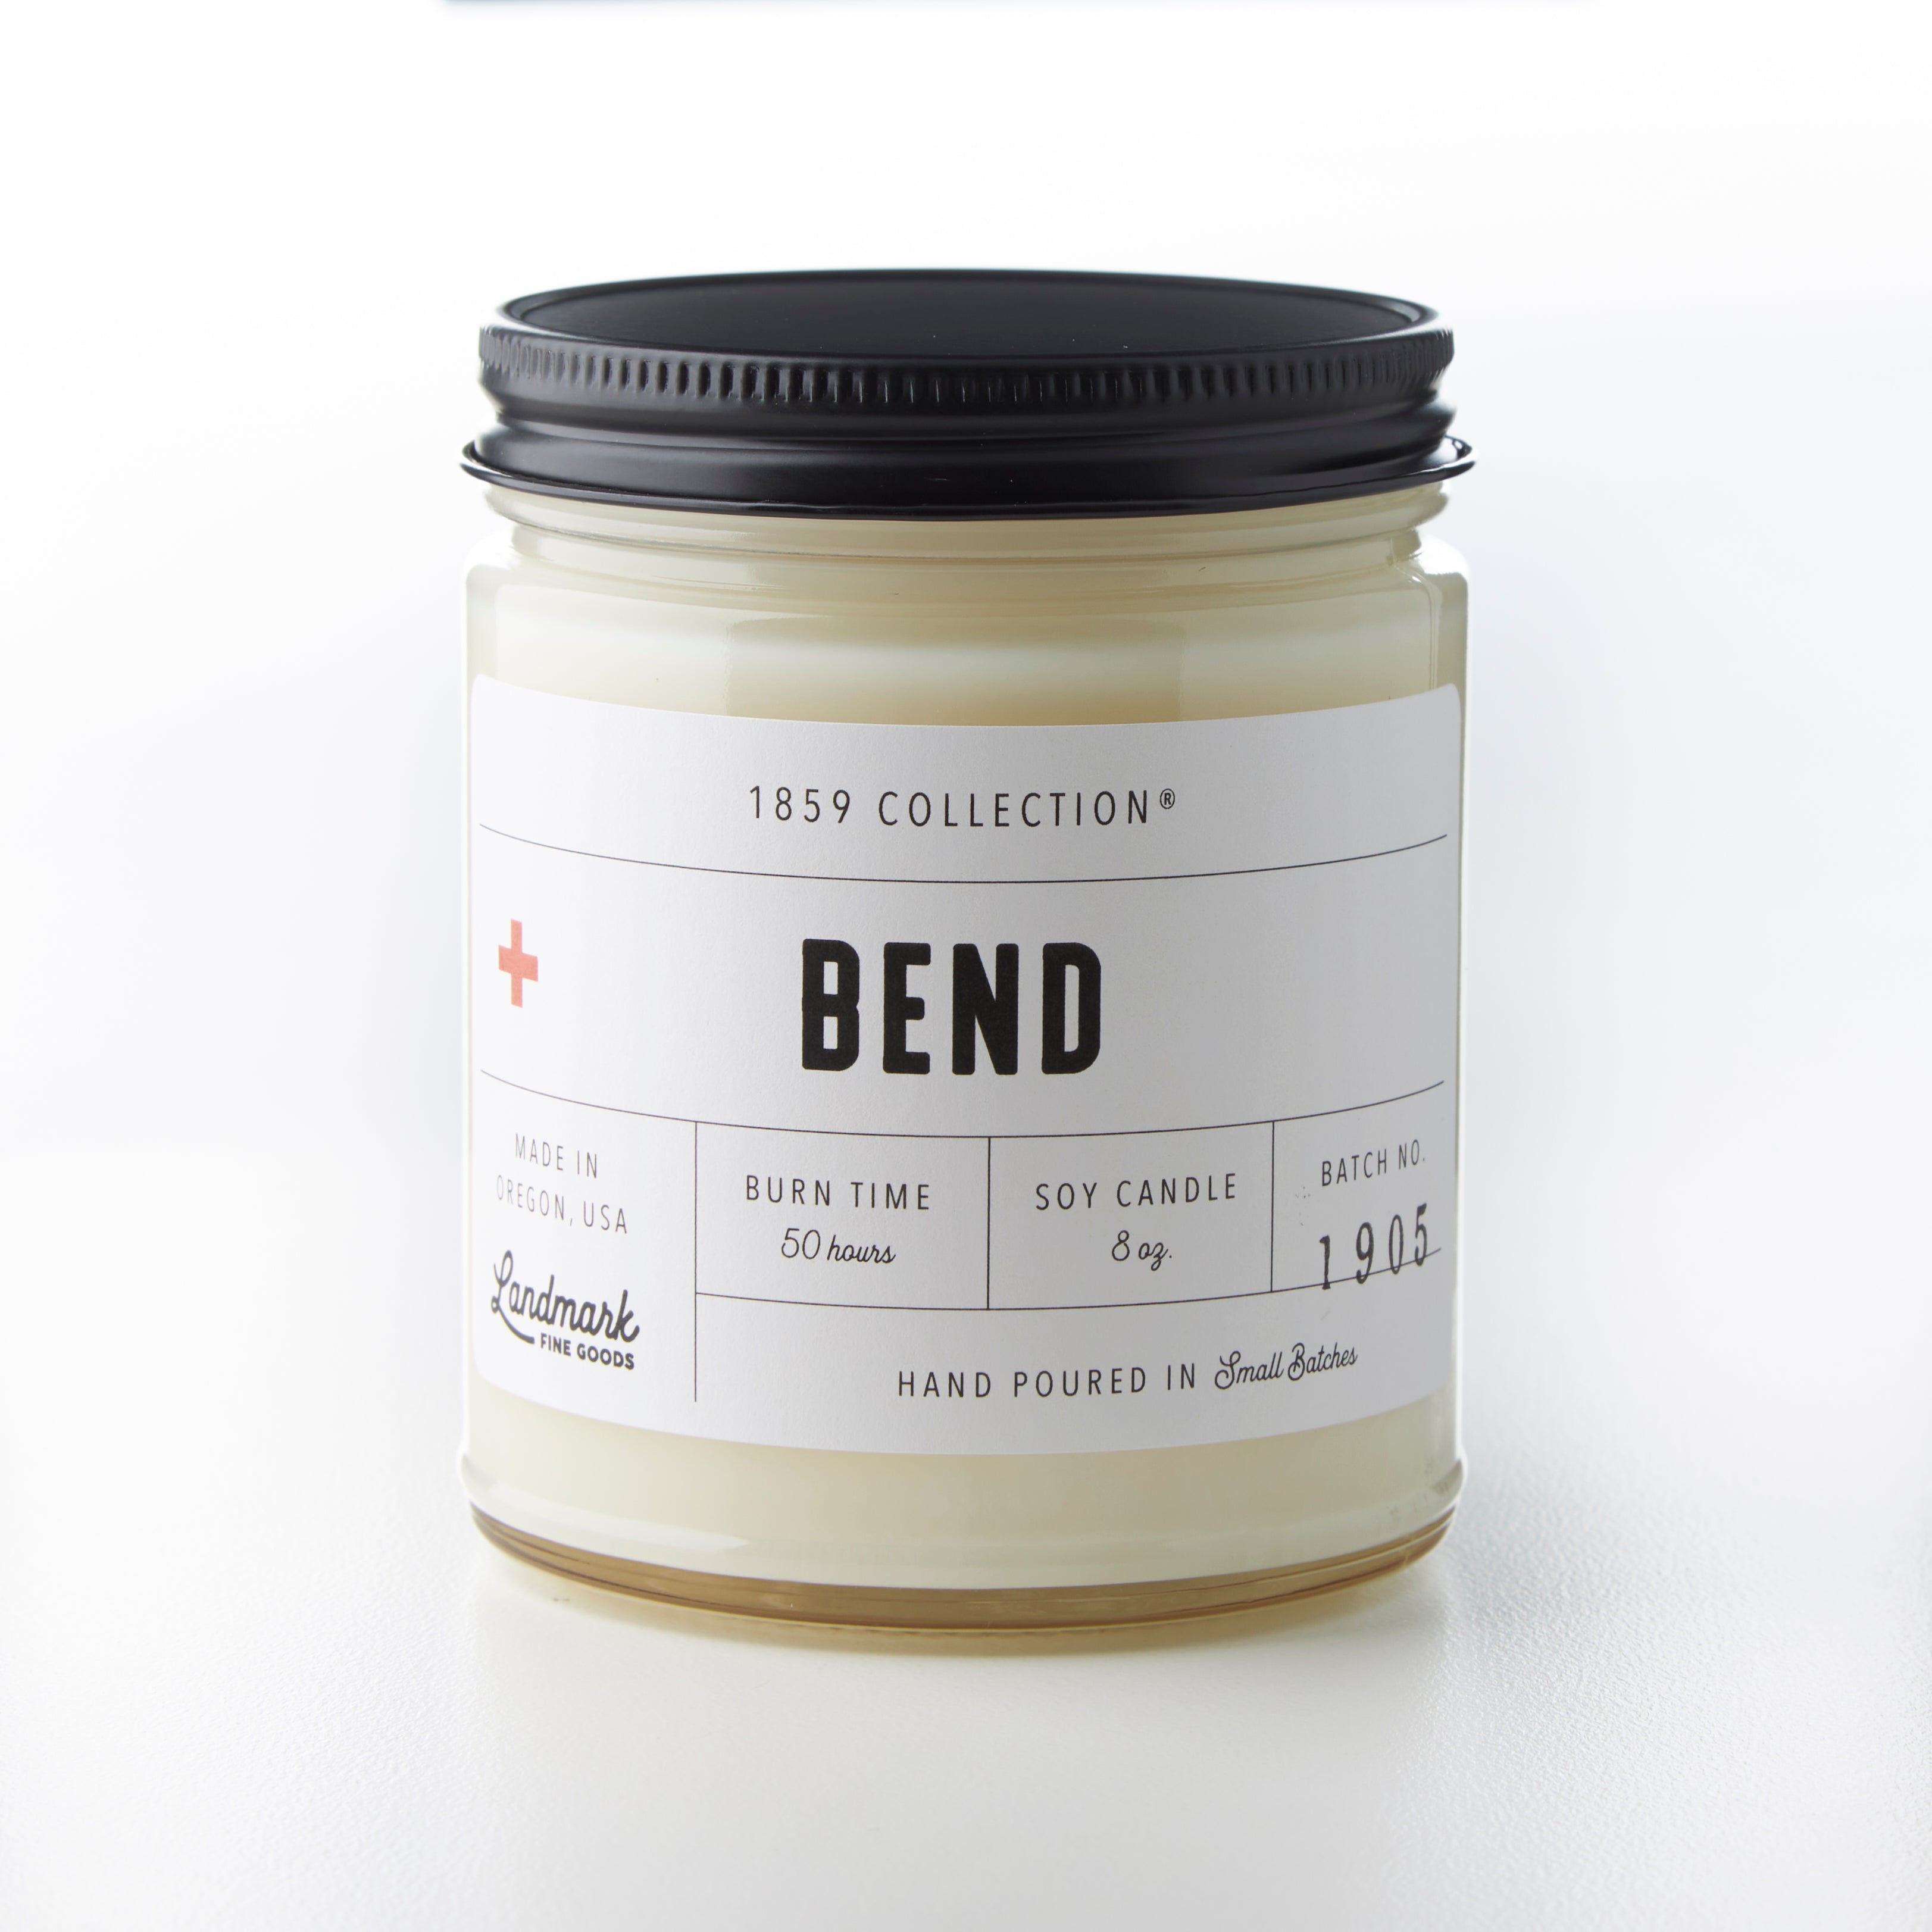 1859 Collection® Candle - Bend